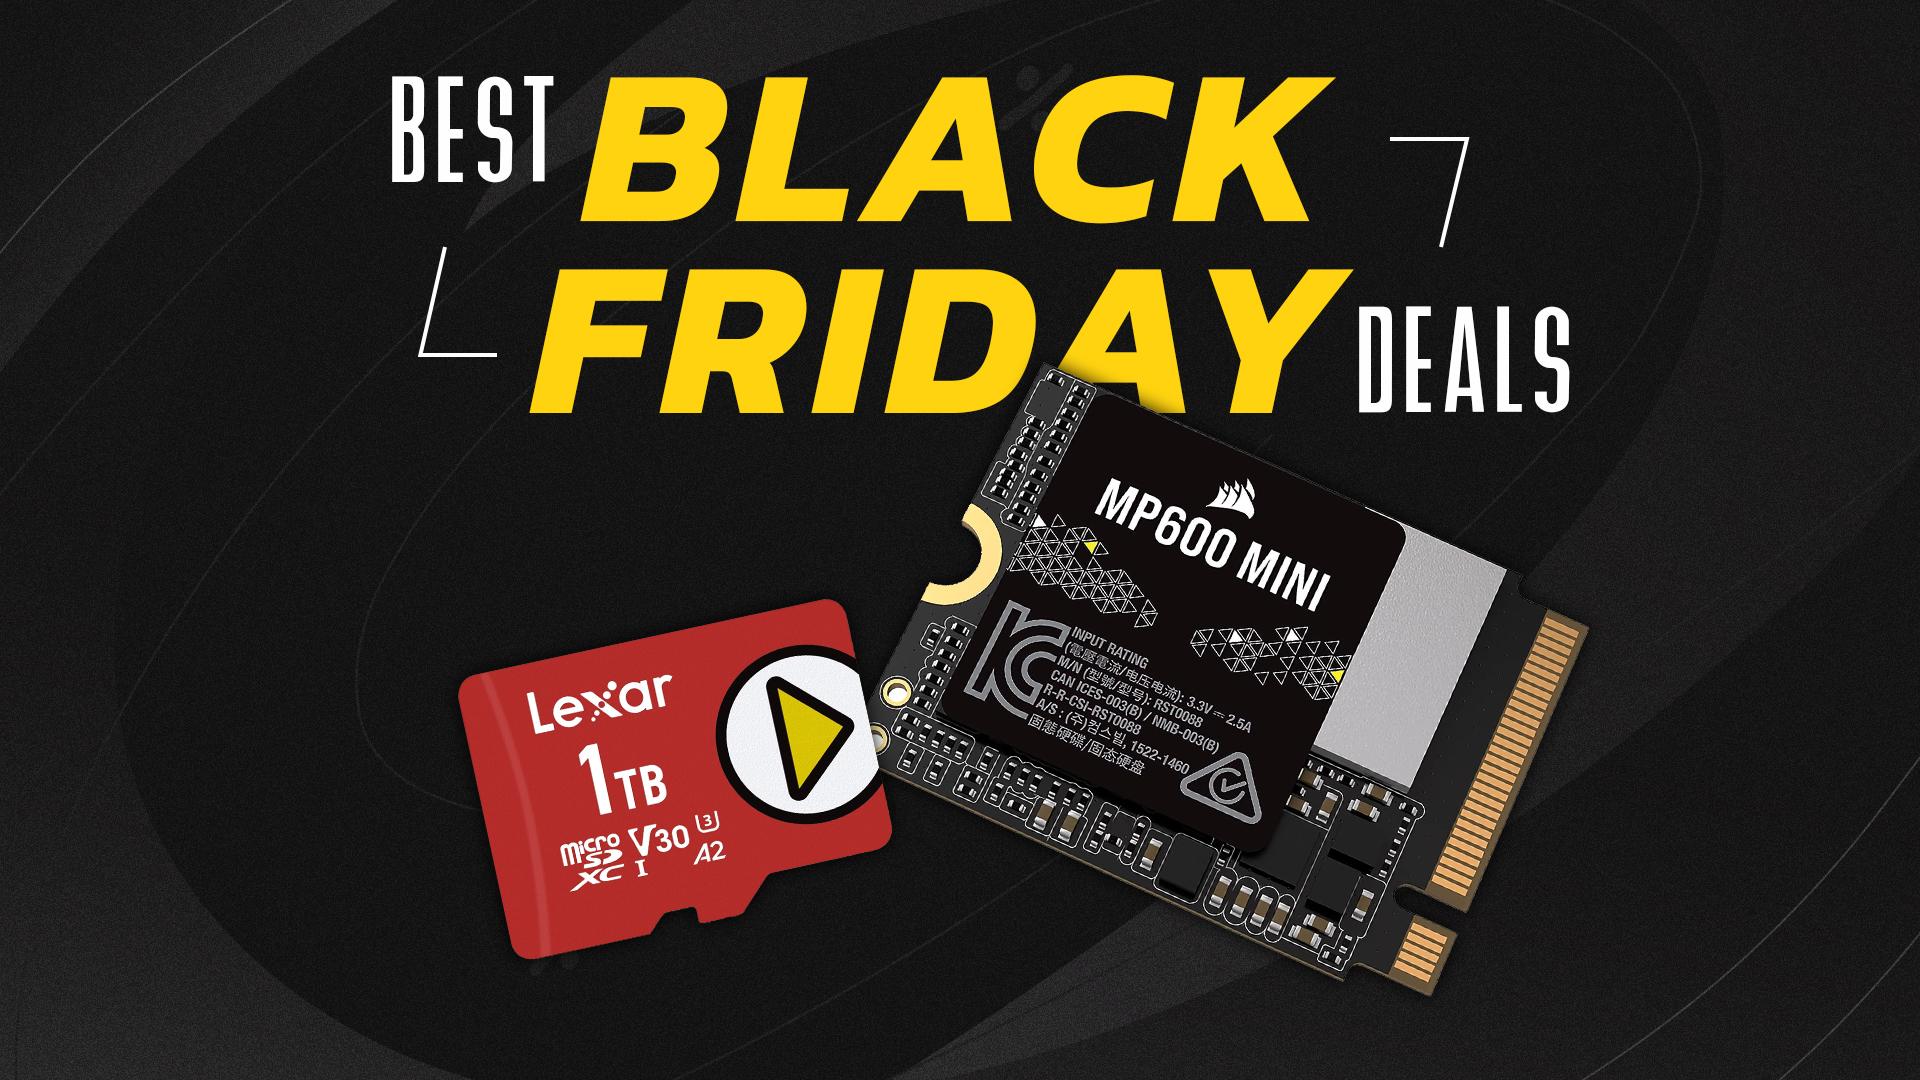 ssd and microsd on black friday branded background